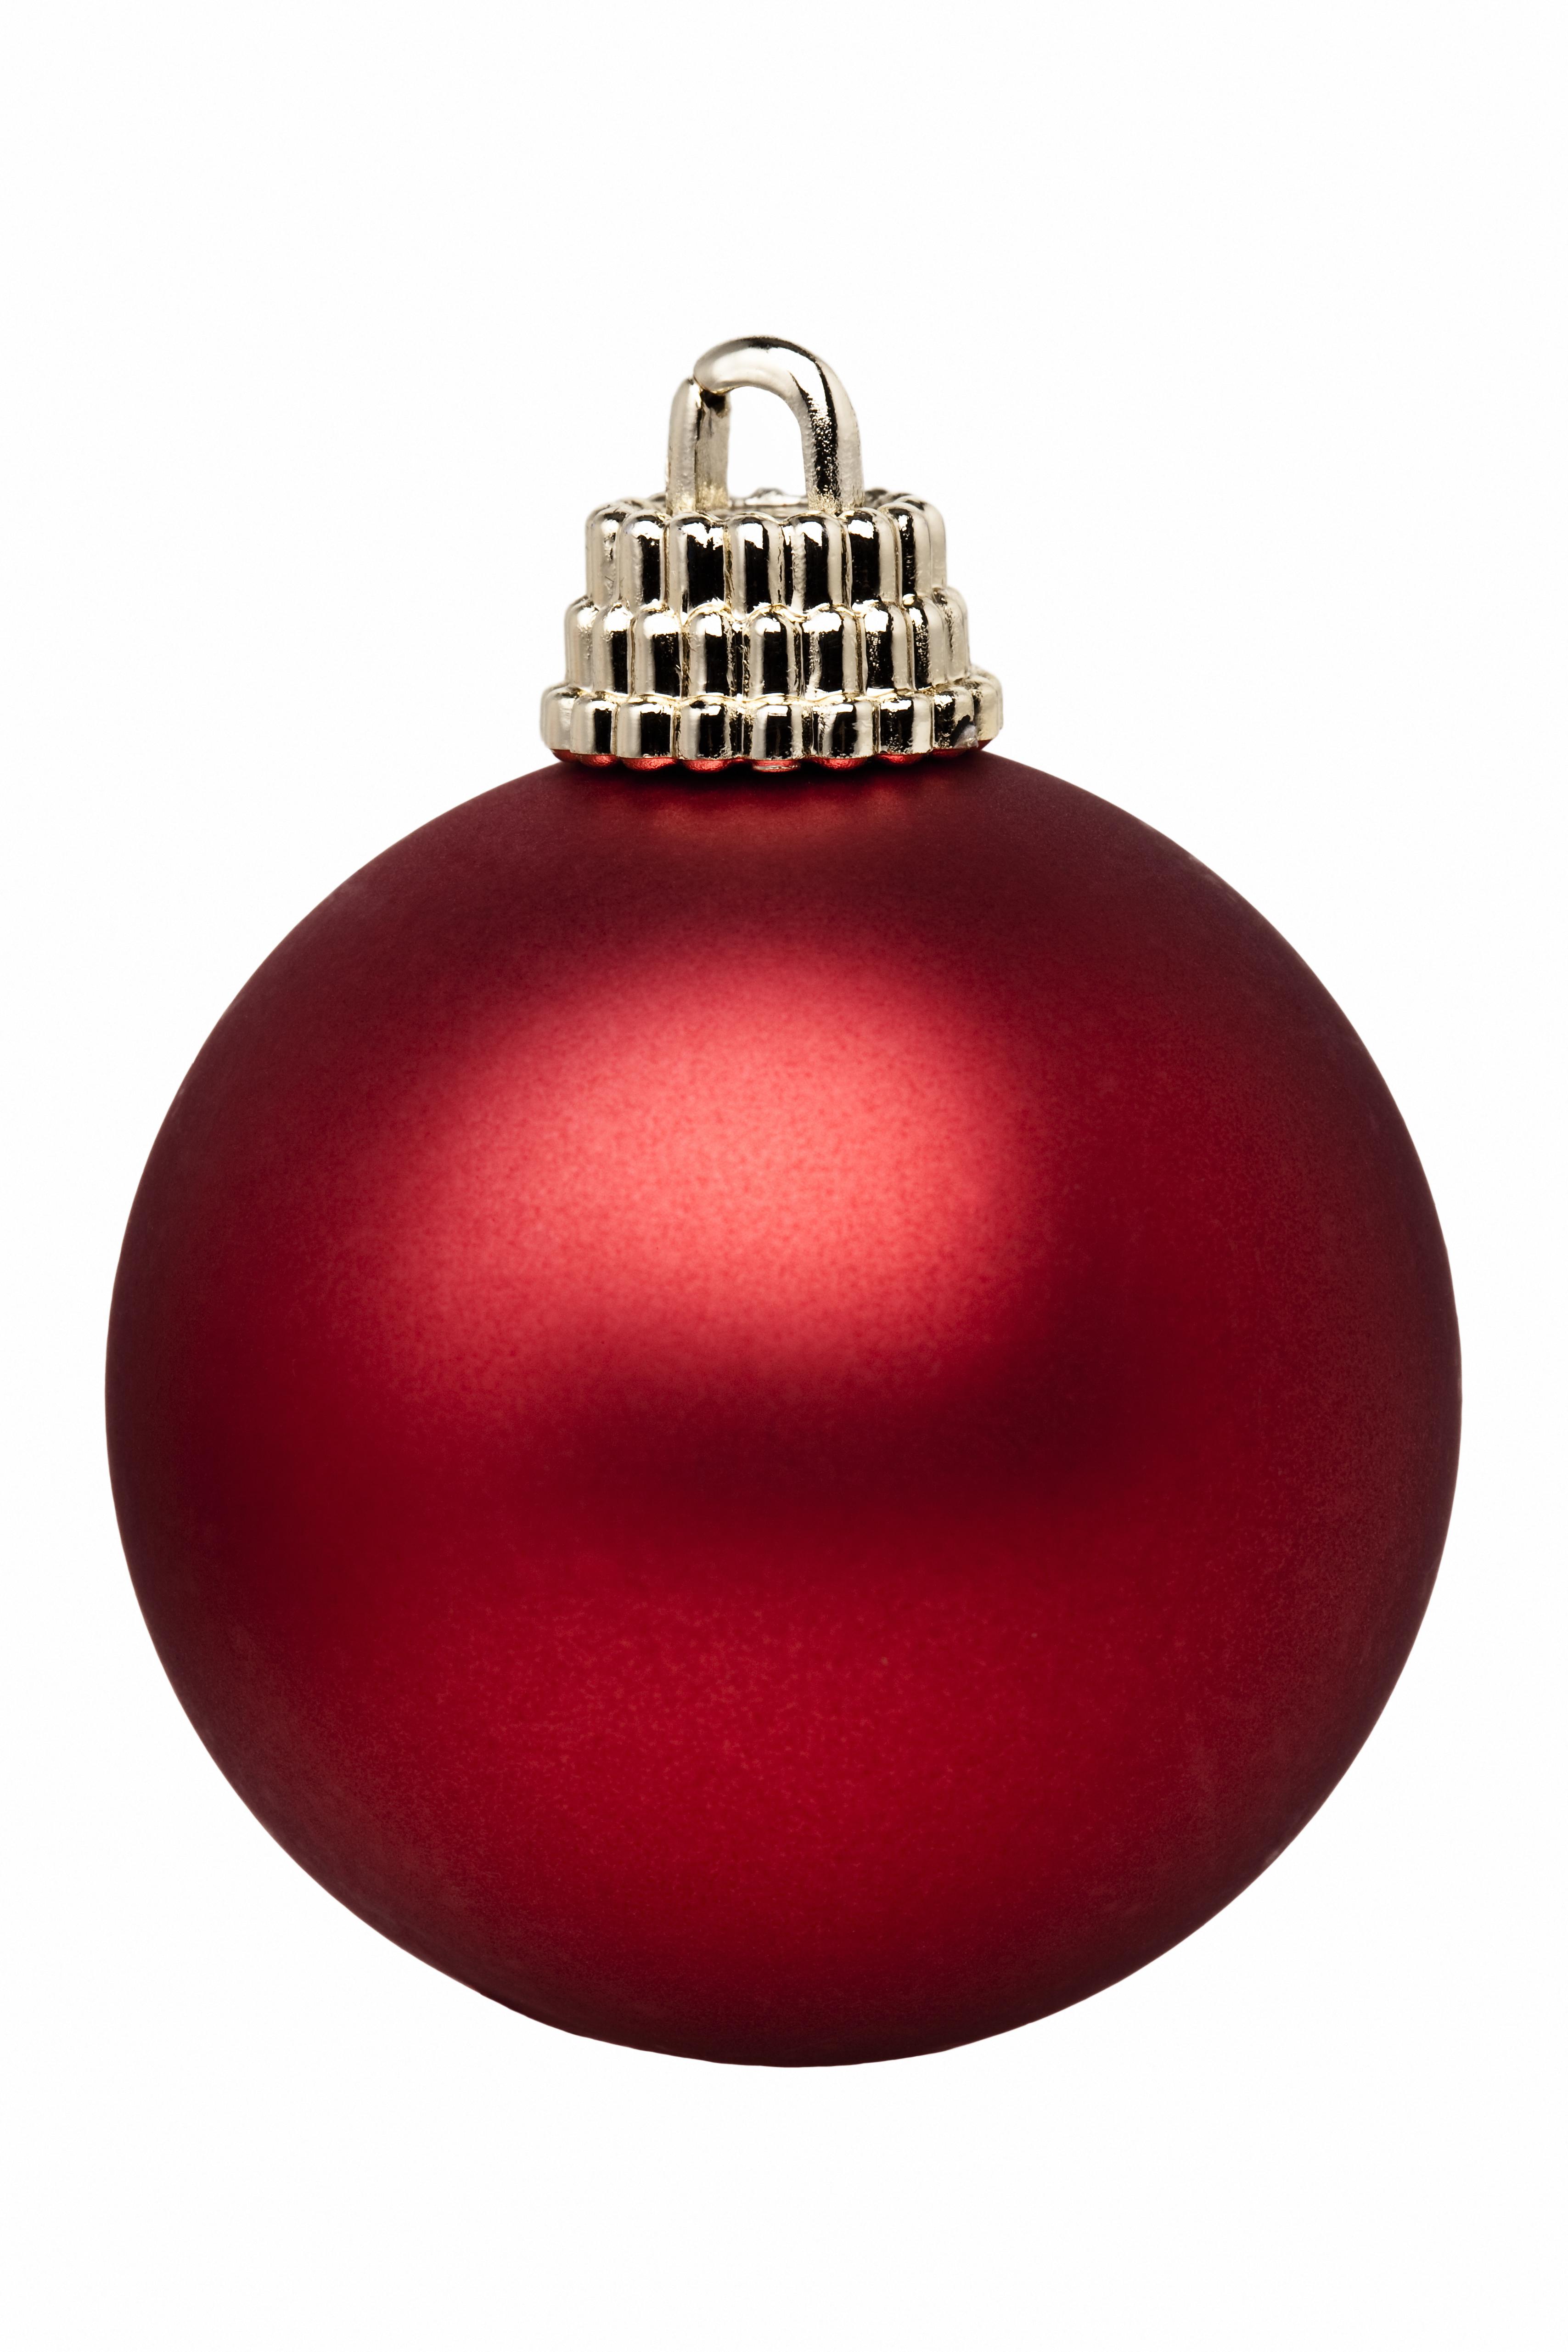 Red christmas tree ball / bauble decoration